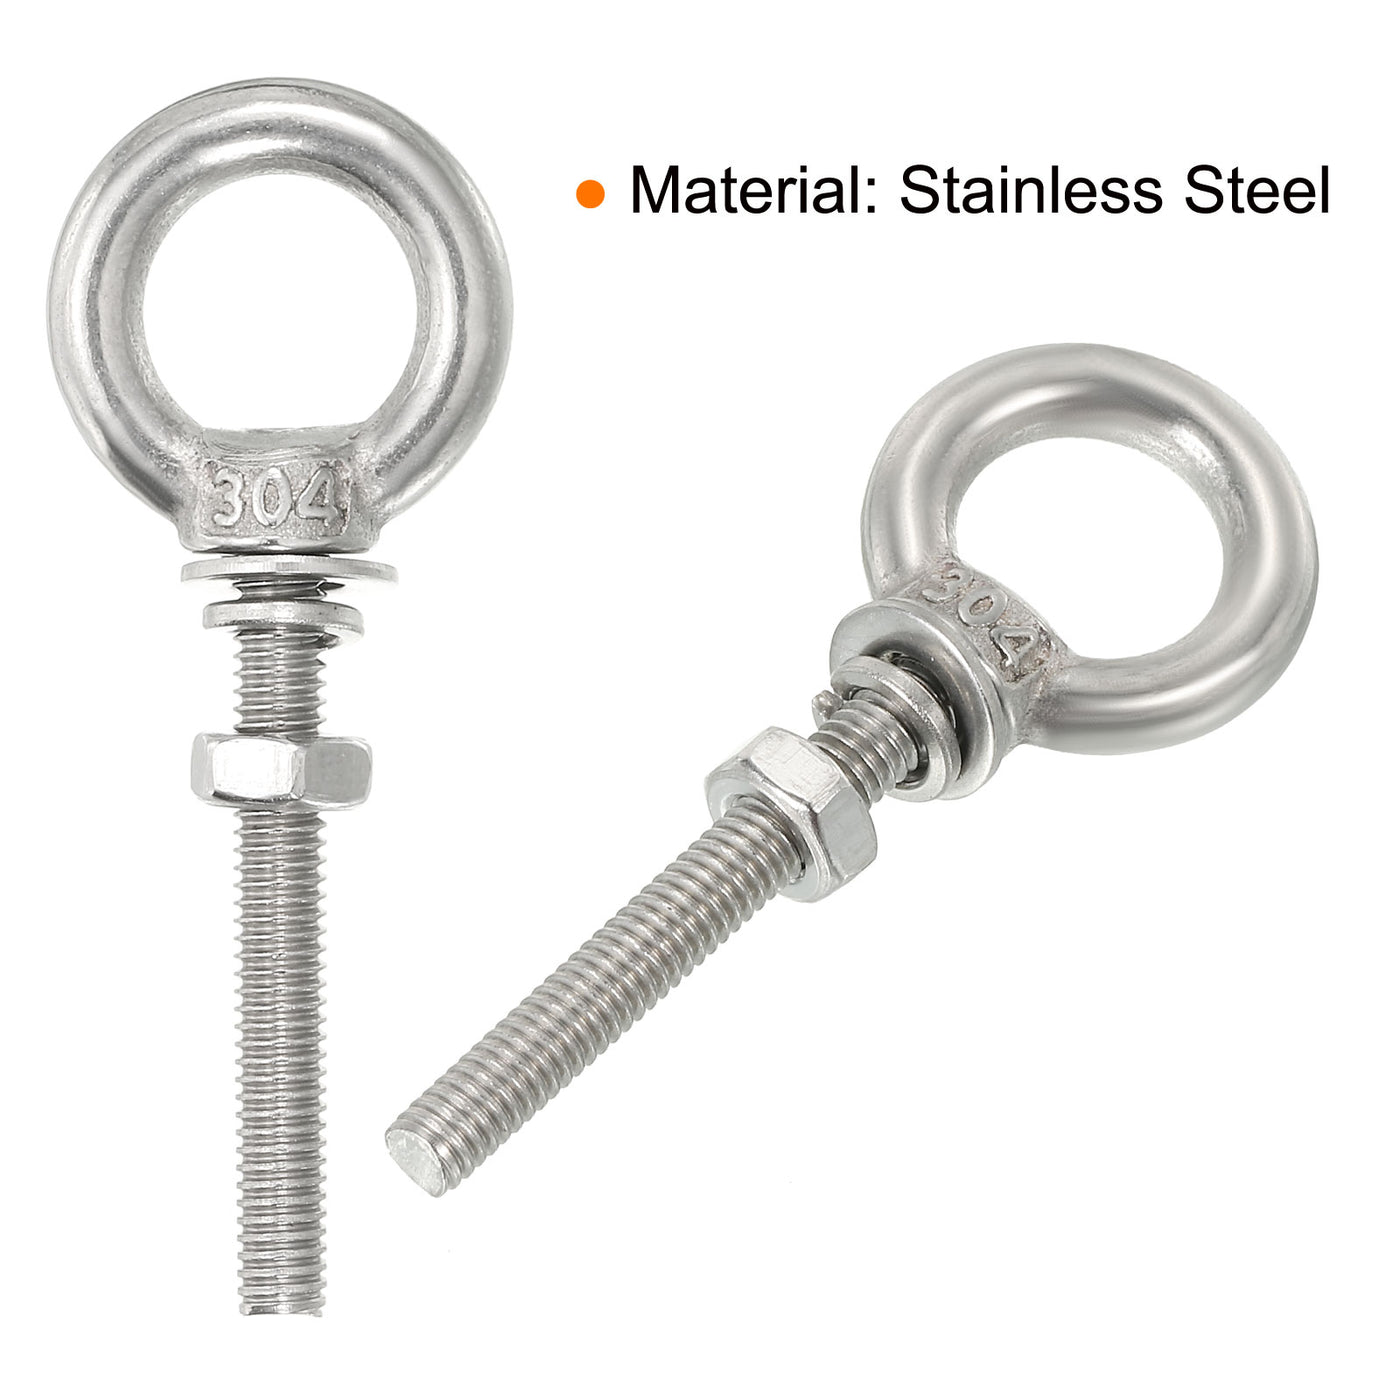 uxcell Uxcell M10x30 3/8"x1.18" Stainless Steel Eye Bolts Threaded Screw Eyebolt Shoulder Ring with Nuts Washers for Lifting Hanging, 4 Set